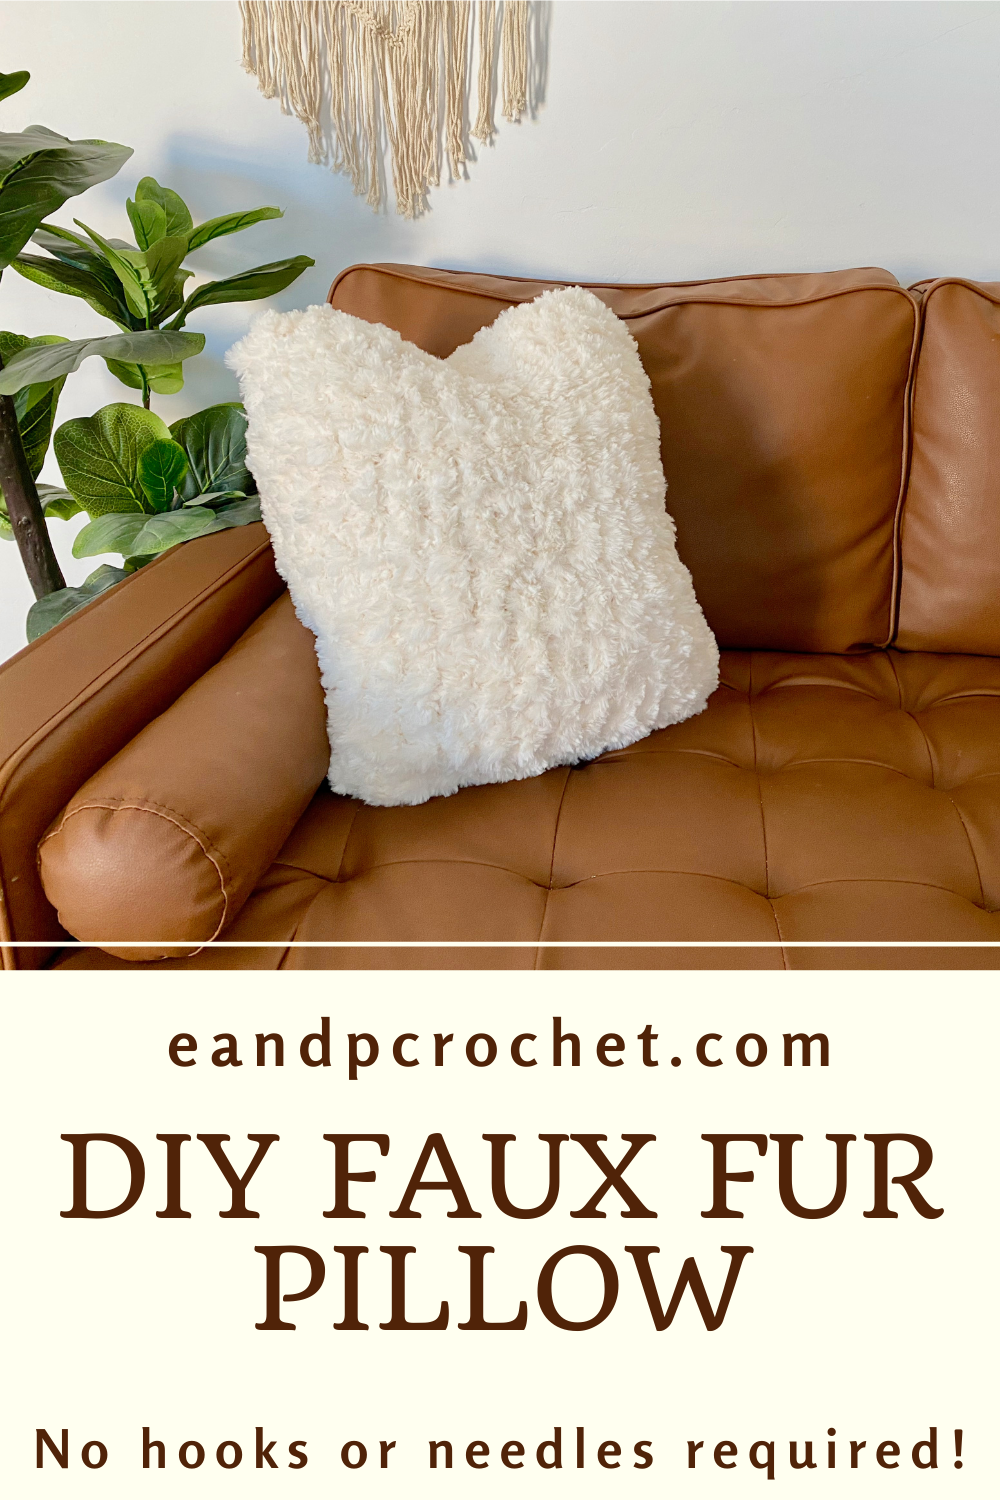 DIY Faux Fur Pillow- Off The Hook Yarn - Evelyn And Peter Crochet